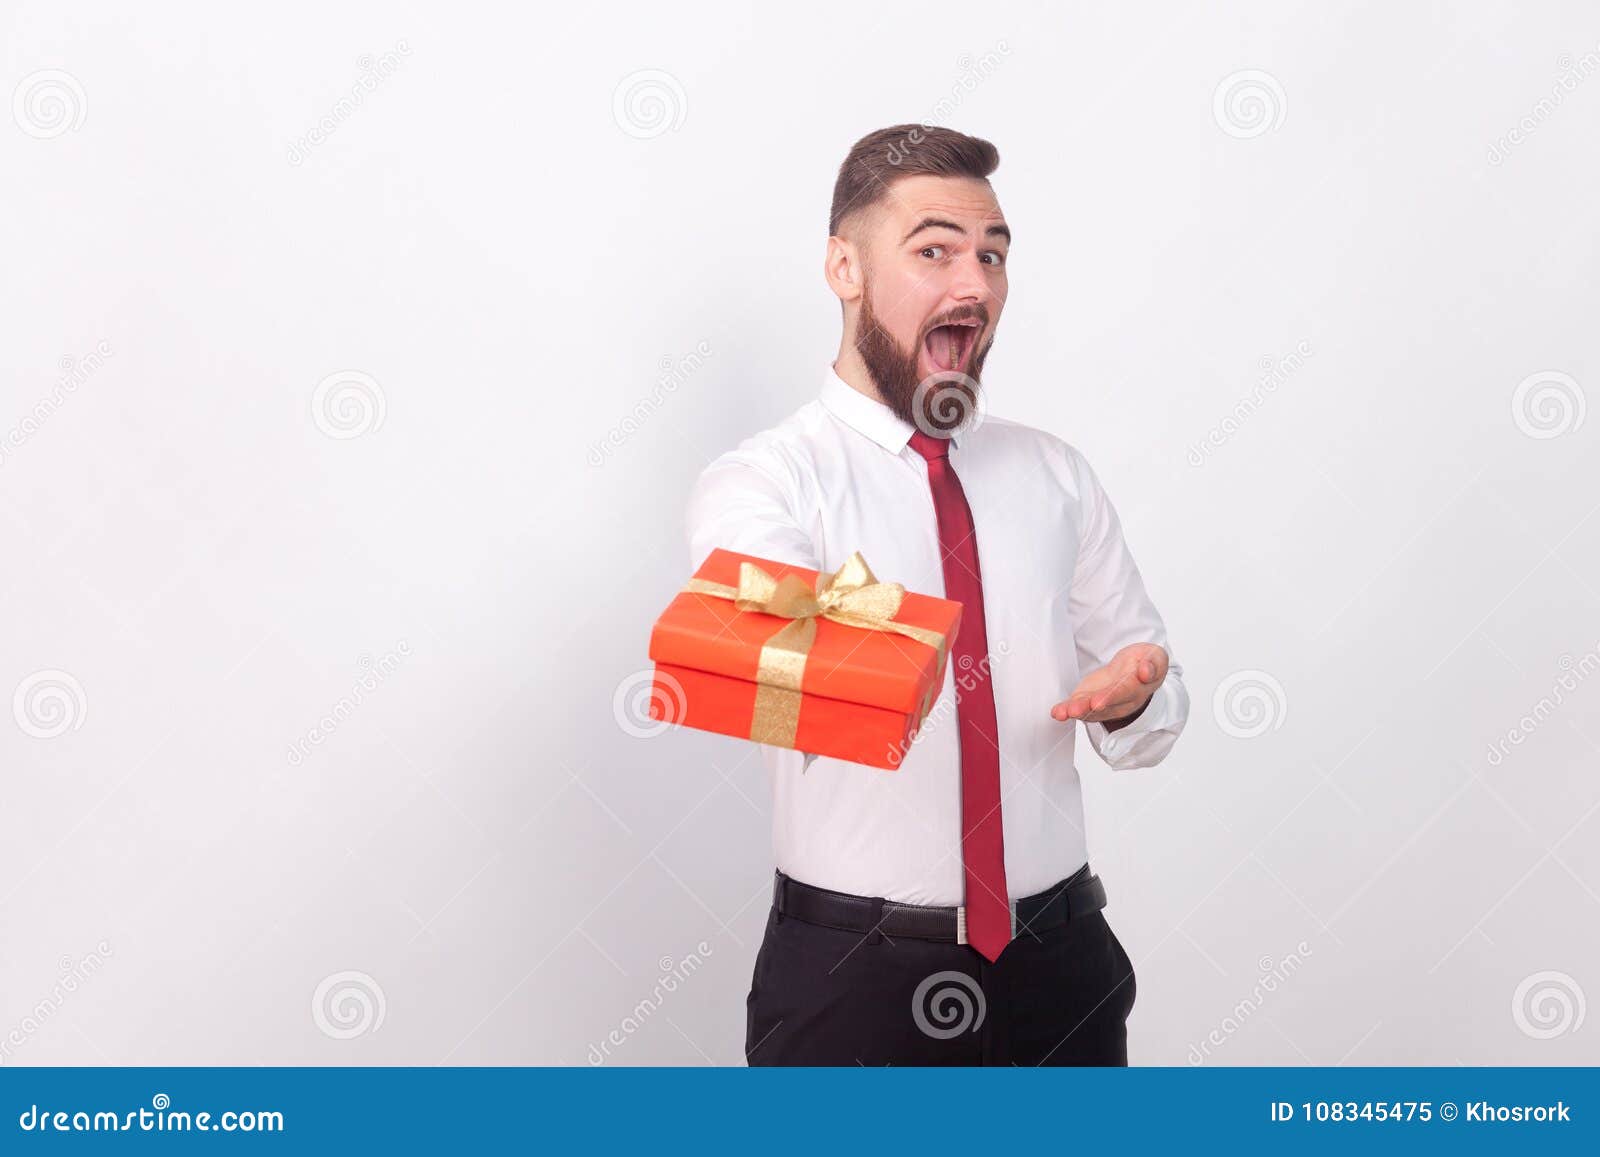 Funny Businessman Present Gift Box For You Stock Image - Image of ...